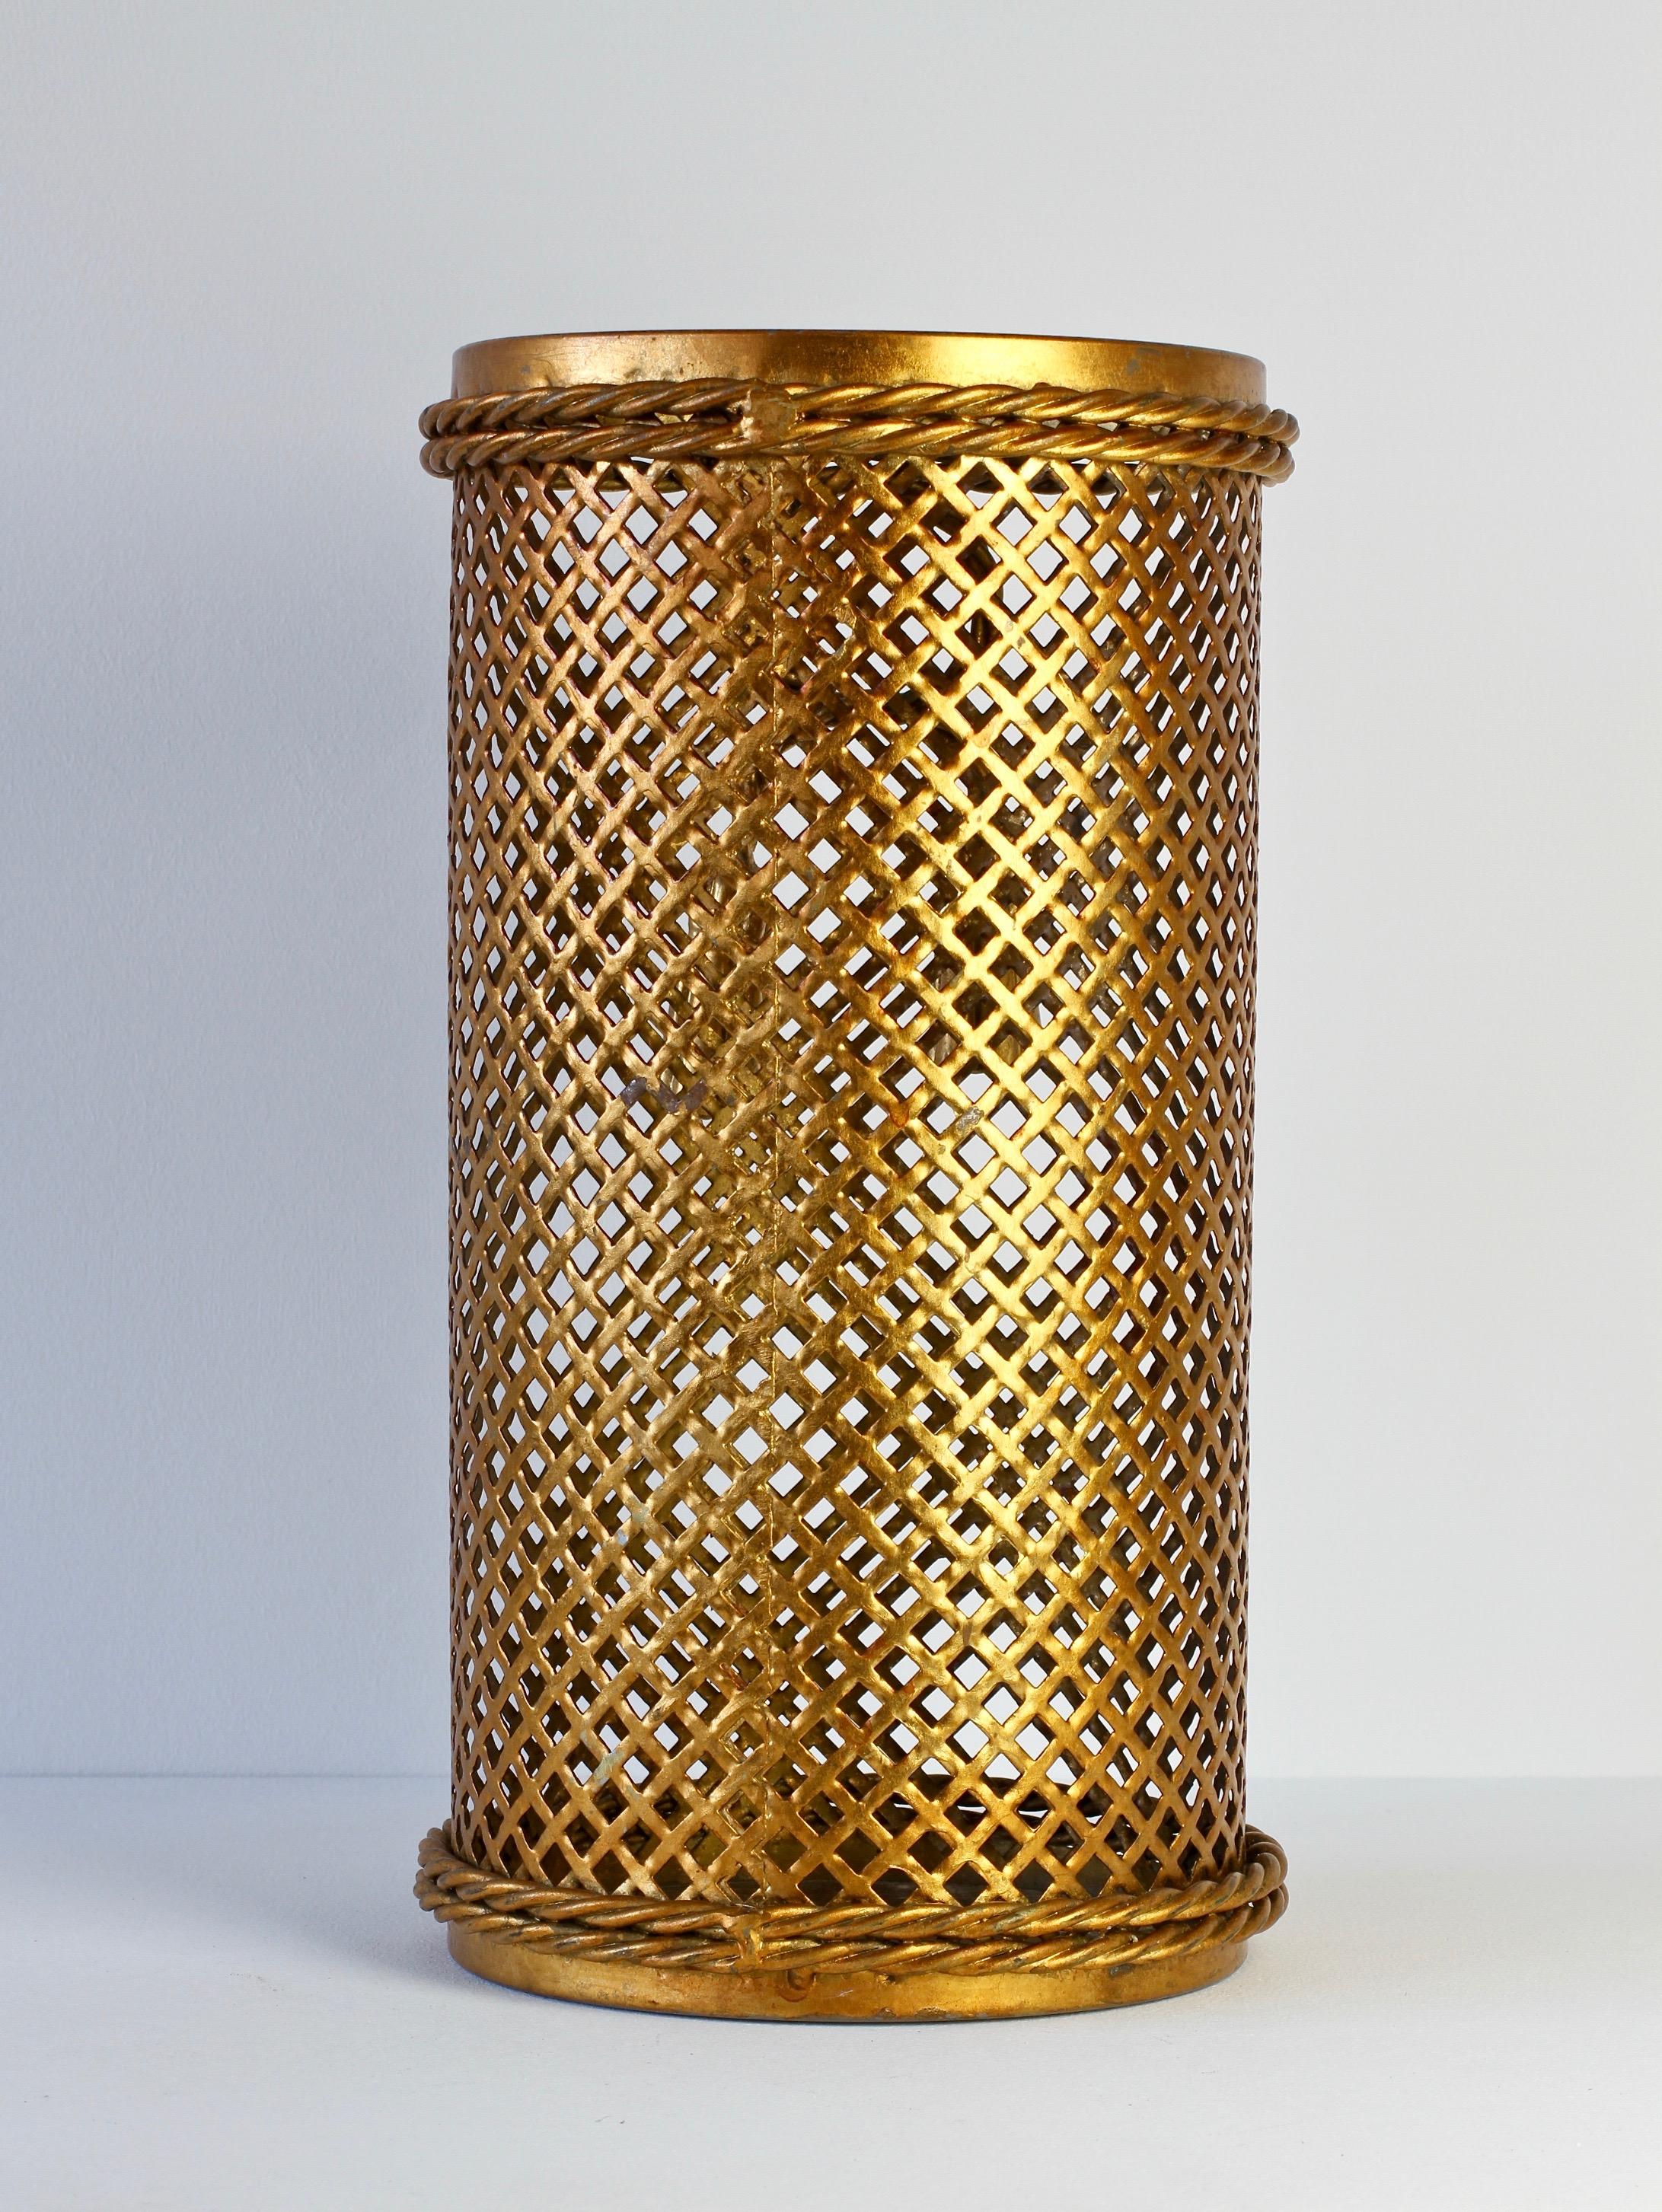 20th Century 1950s Italian Hollywood Regency Gold Gilded Umbrella Stand or Waste Paper Basket